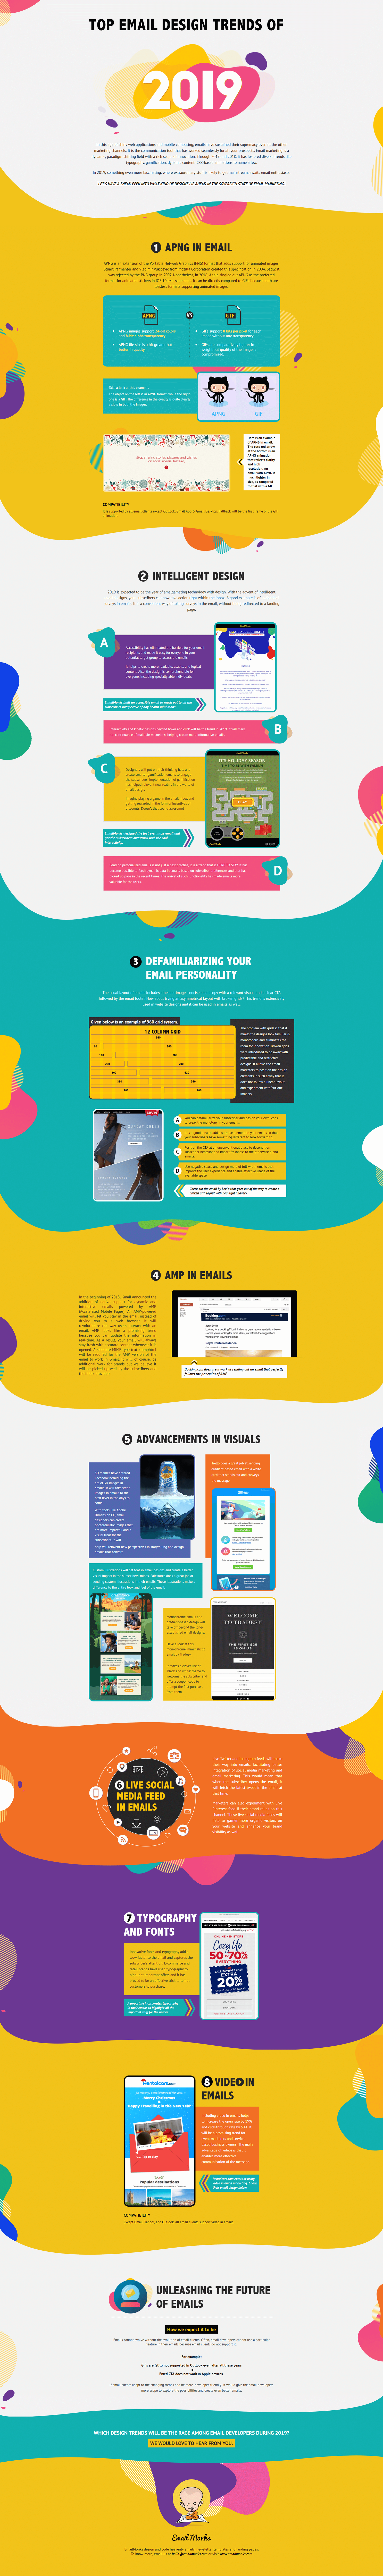 Top 8 Email Design Trends To Follow In 2019